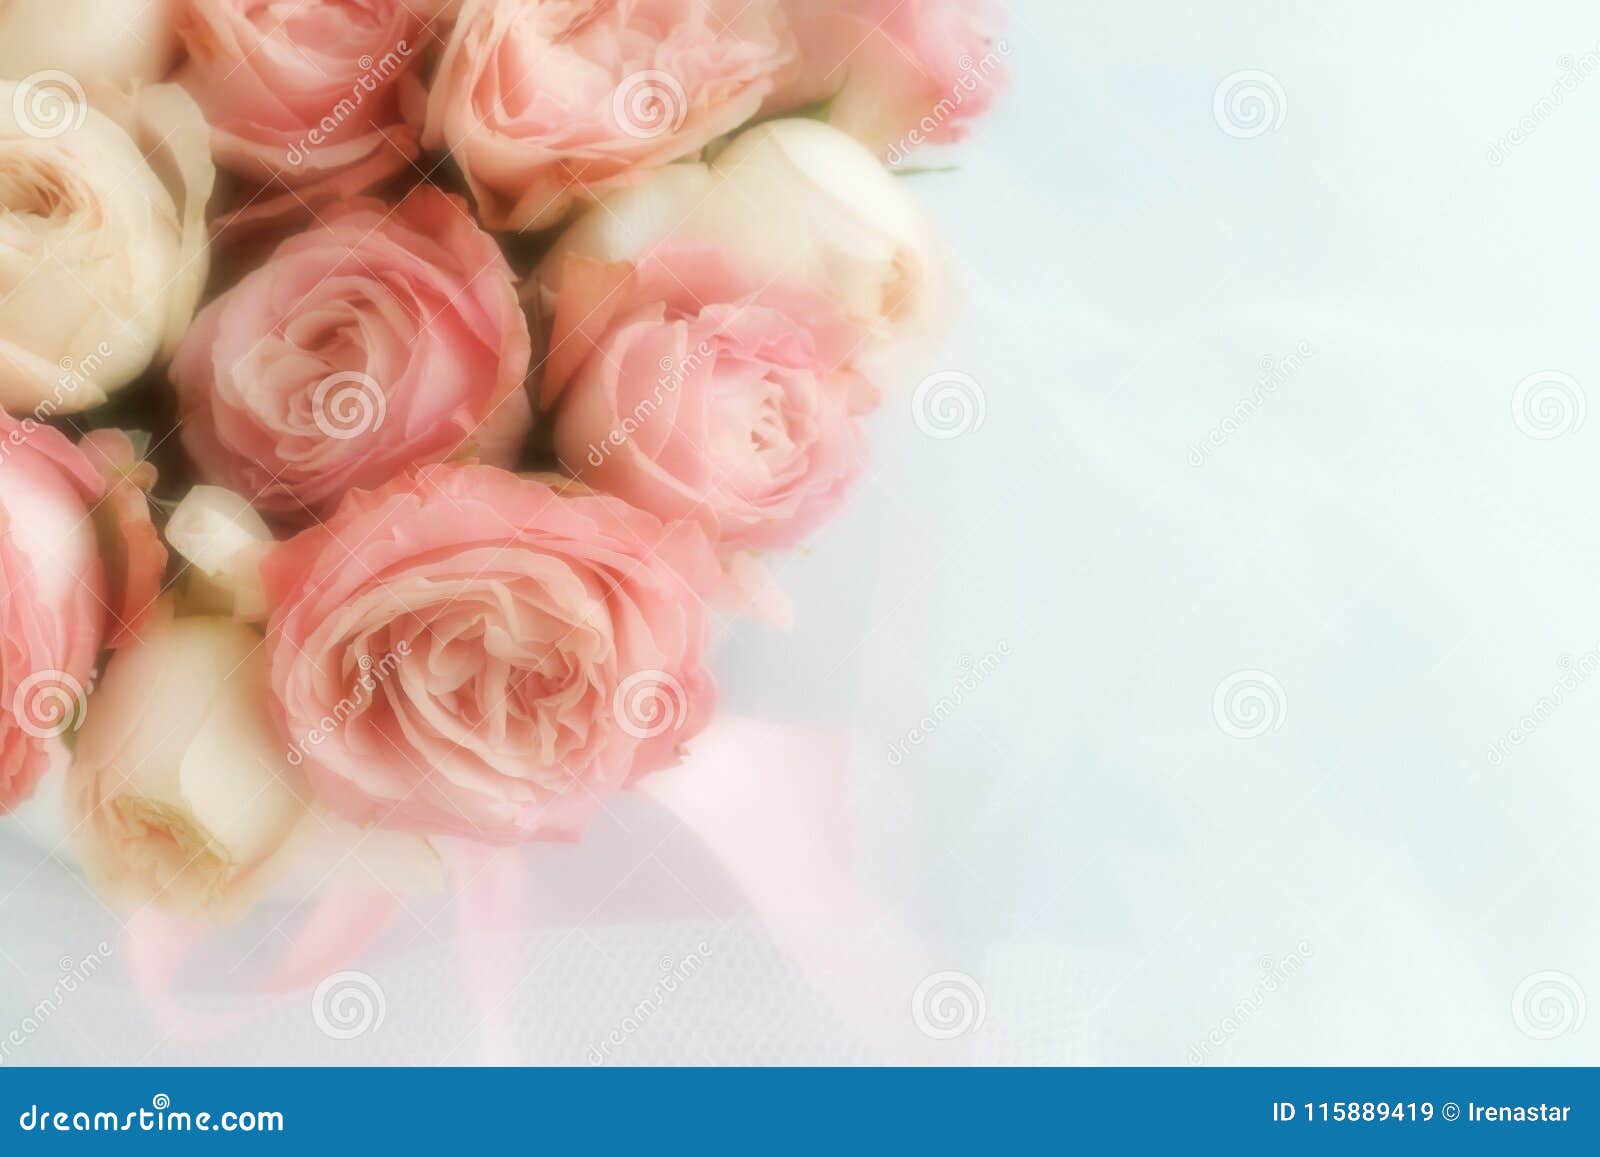 blur effect, soft focus flowers background with bouquet of pale pink roses